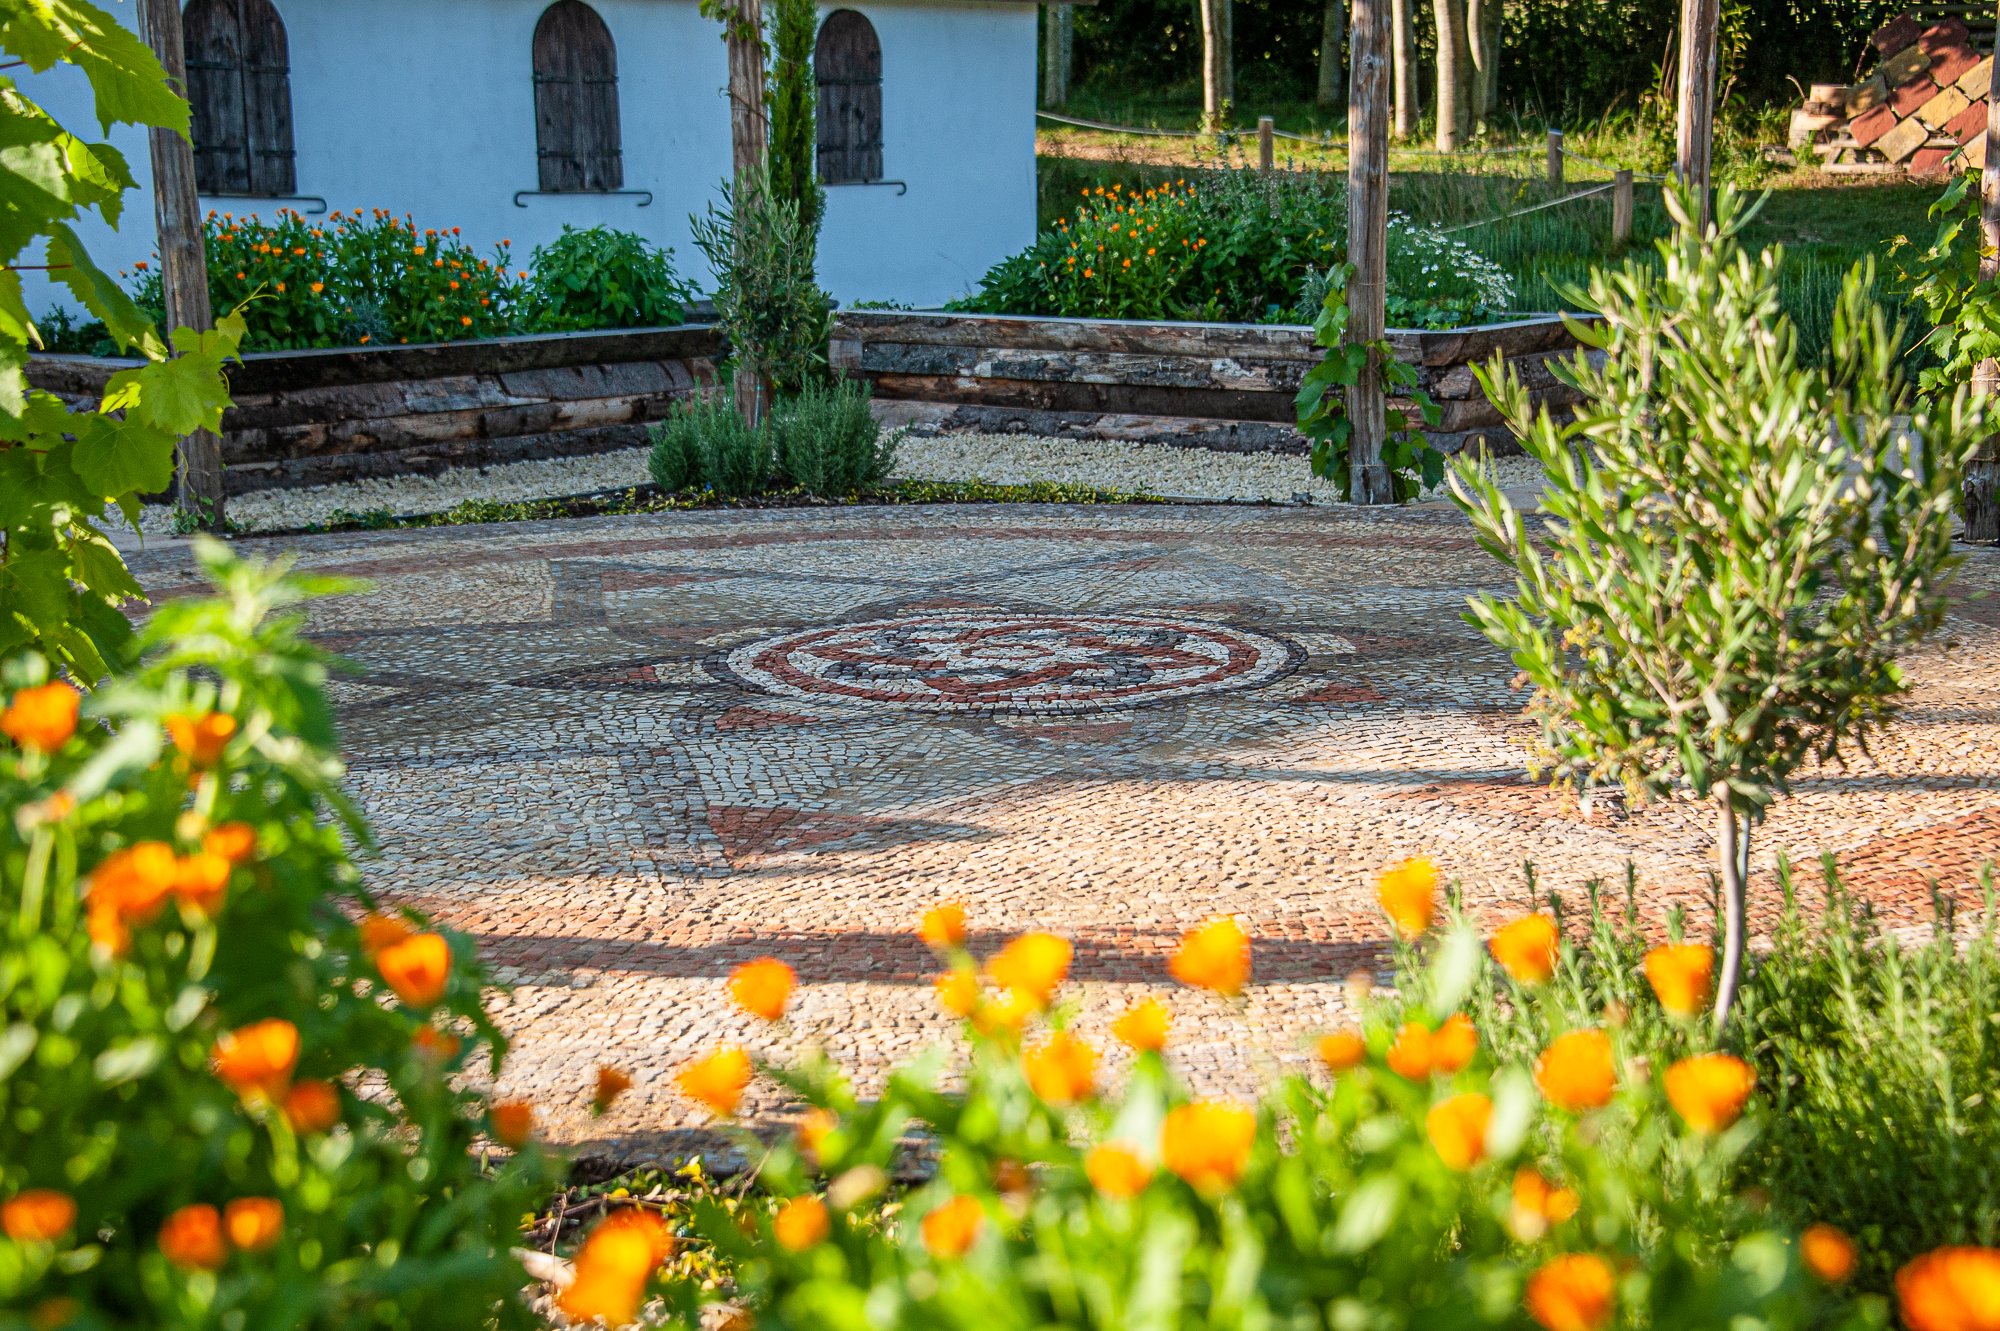 The mosaic in the formal Roman garden